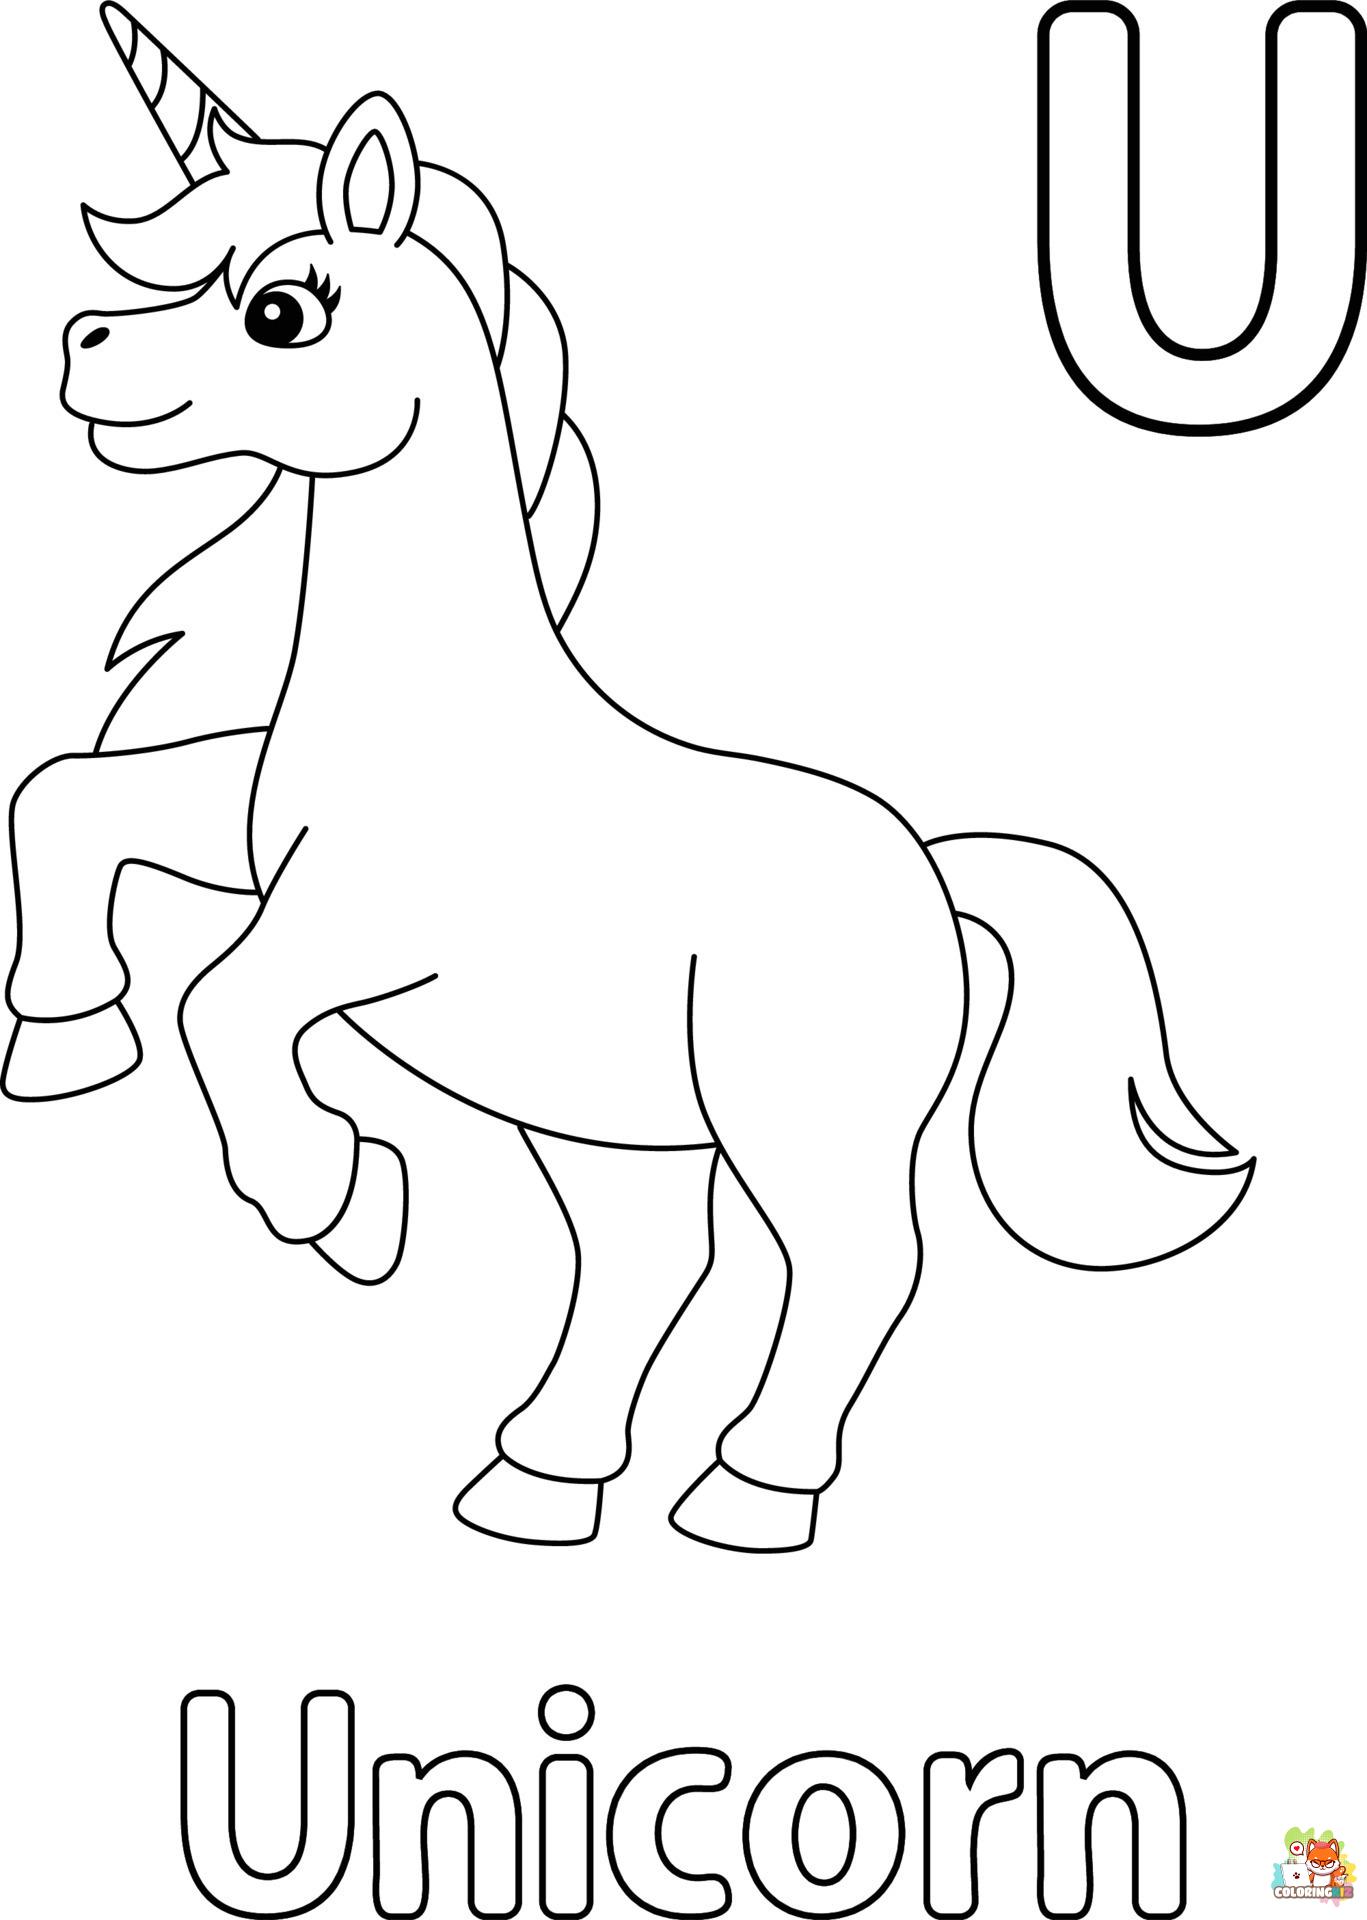 Unicorn Jumping Coloring Pages 5